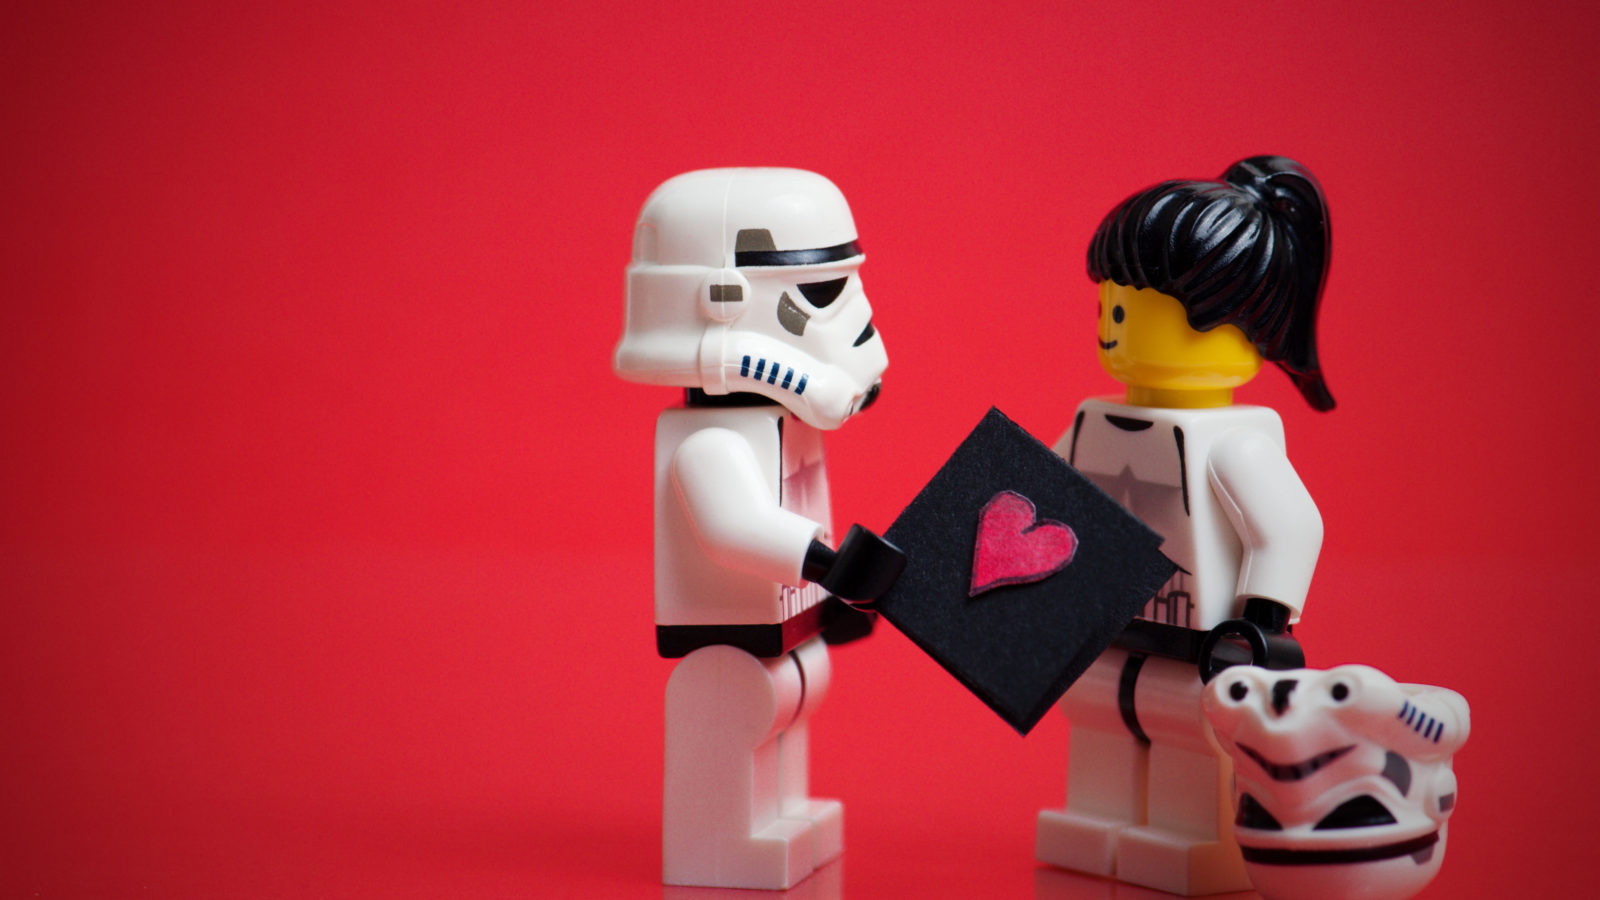 Sweeten up valentine’s day with some “geek”